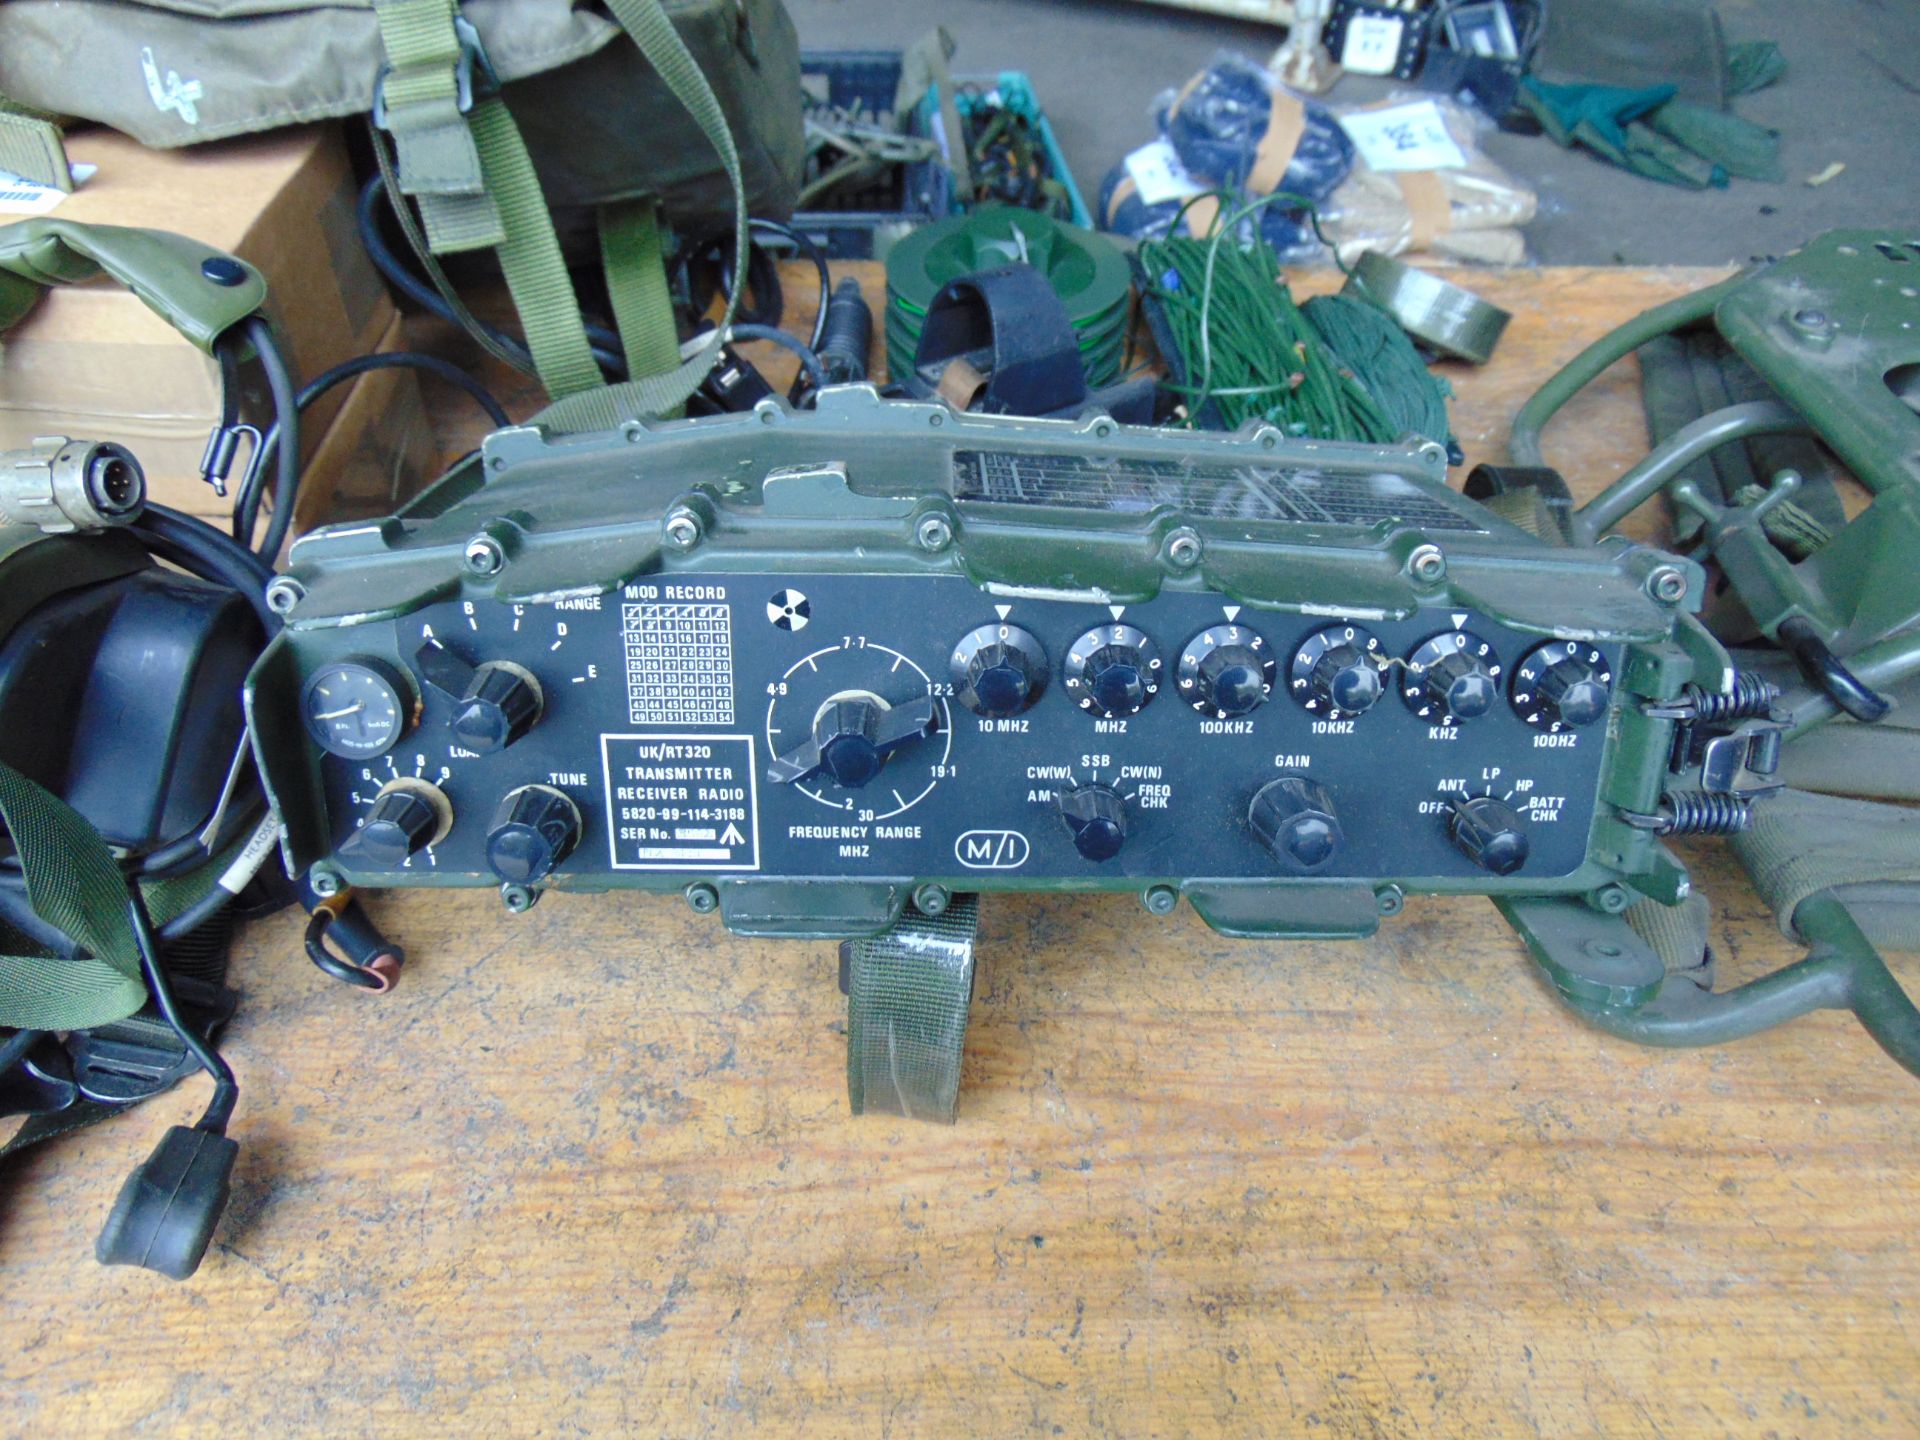 Clansman UK/RT 320 Transmitter Receiver c/w Accessories and 2 Spare Batteries as Shown - Image 2 of 8